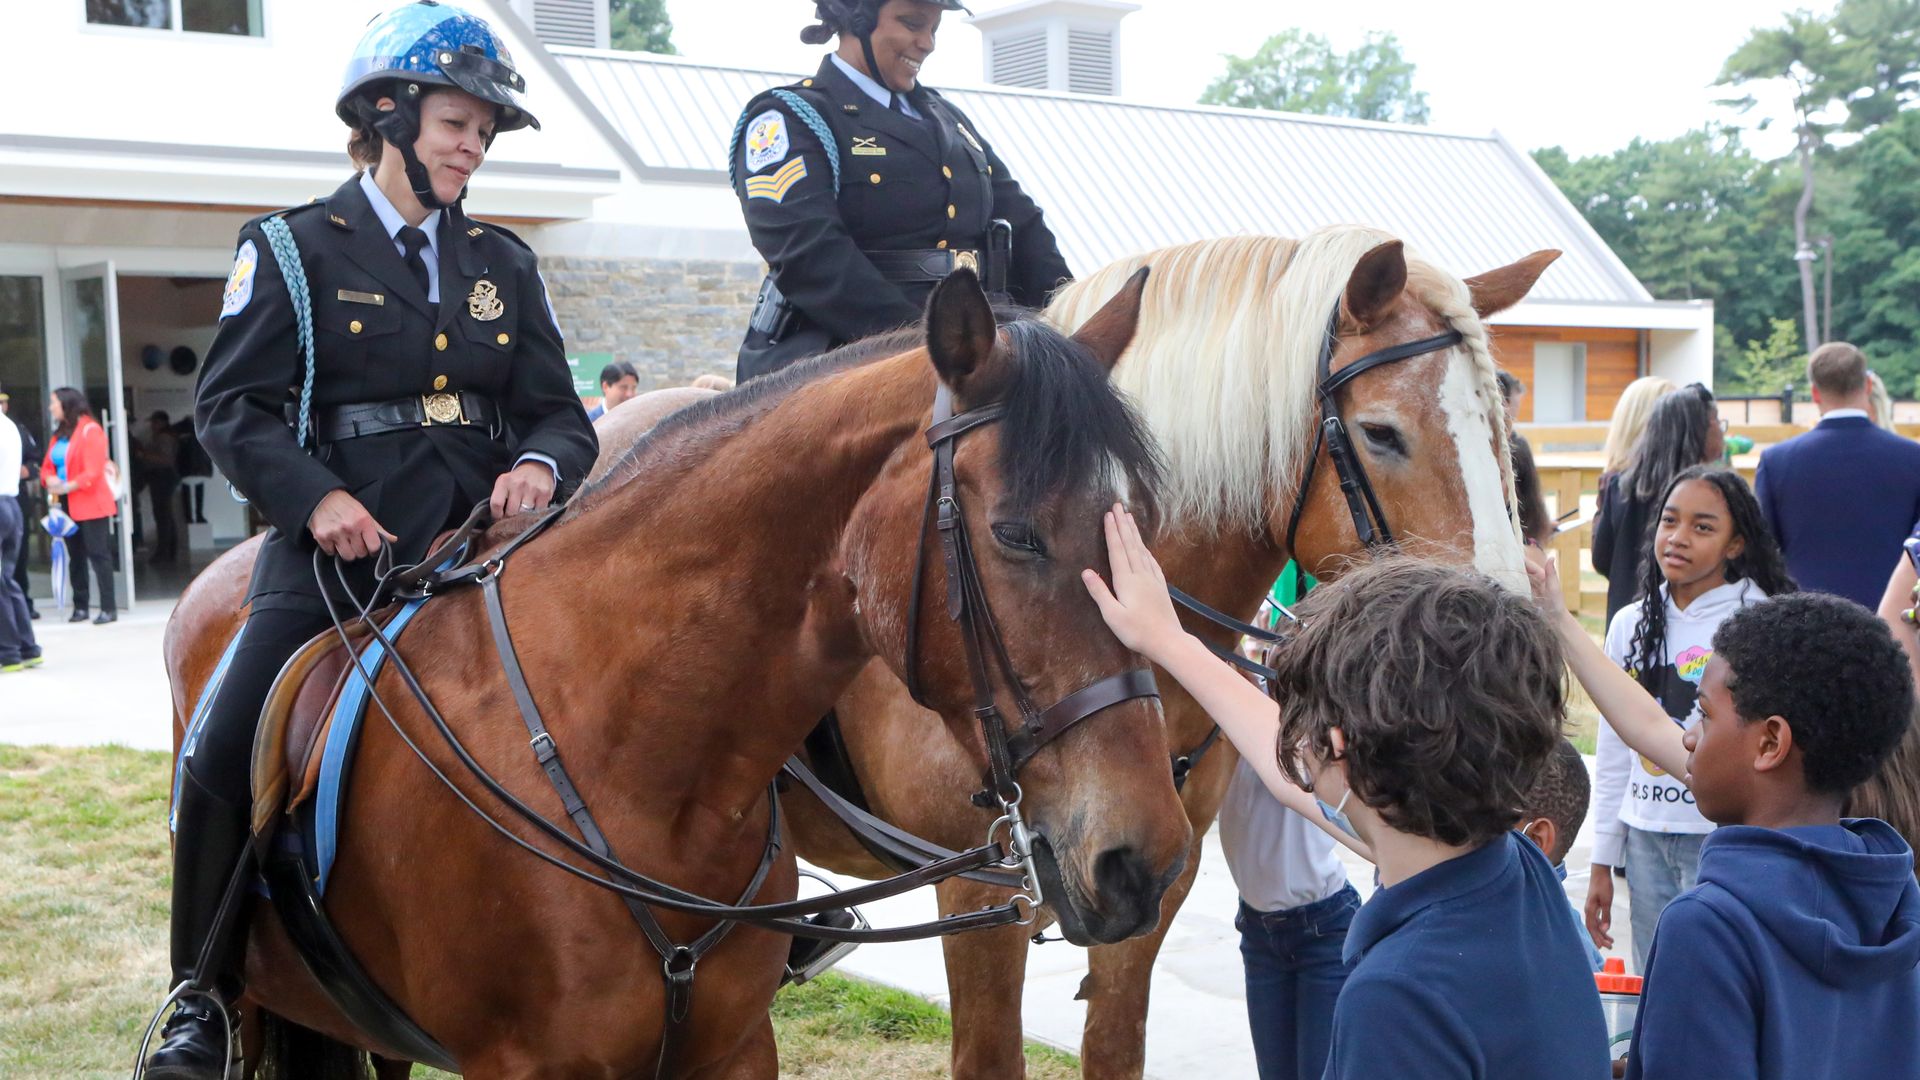 The Mounted Park Police and horses visit with kids on the National Malll